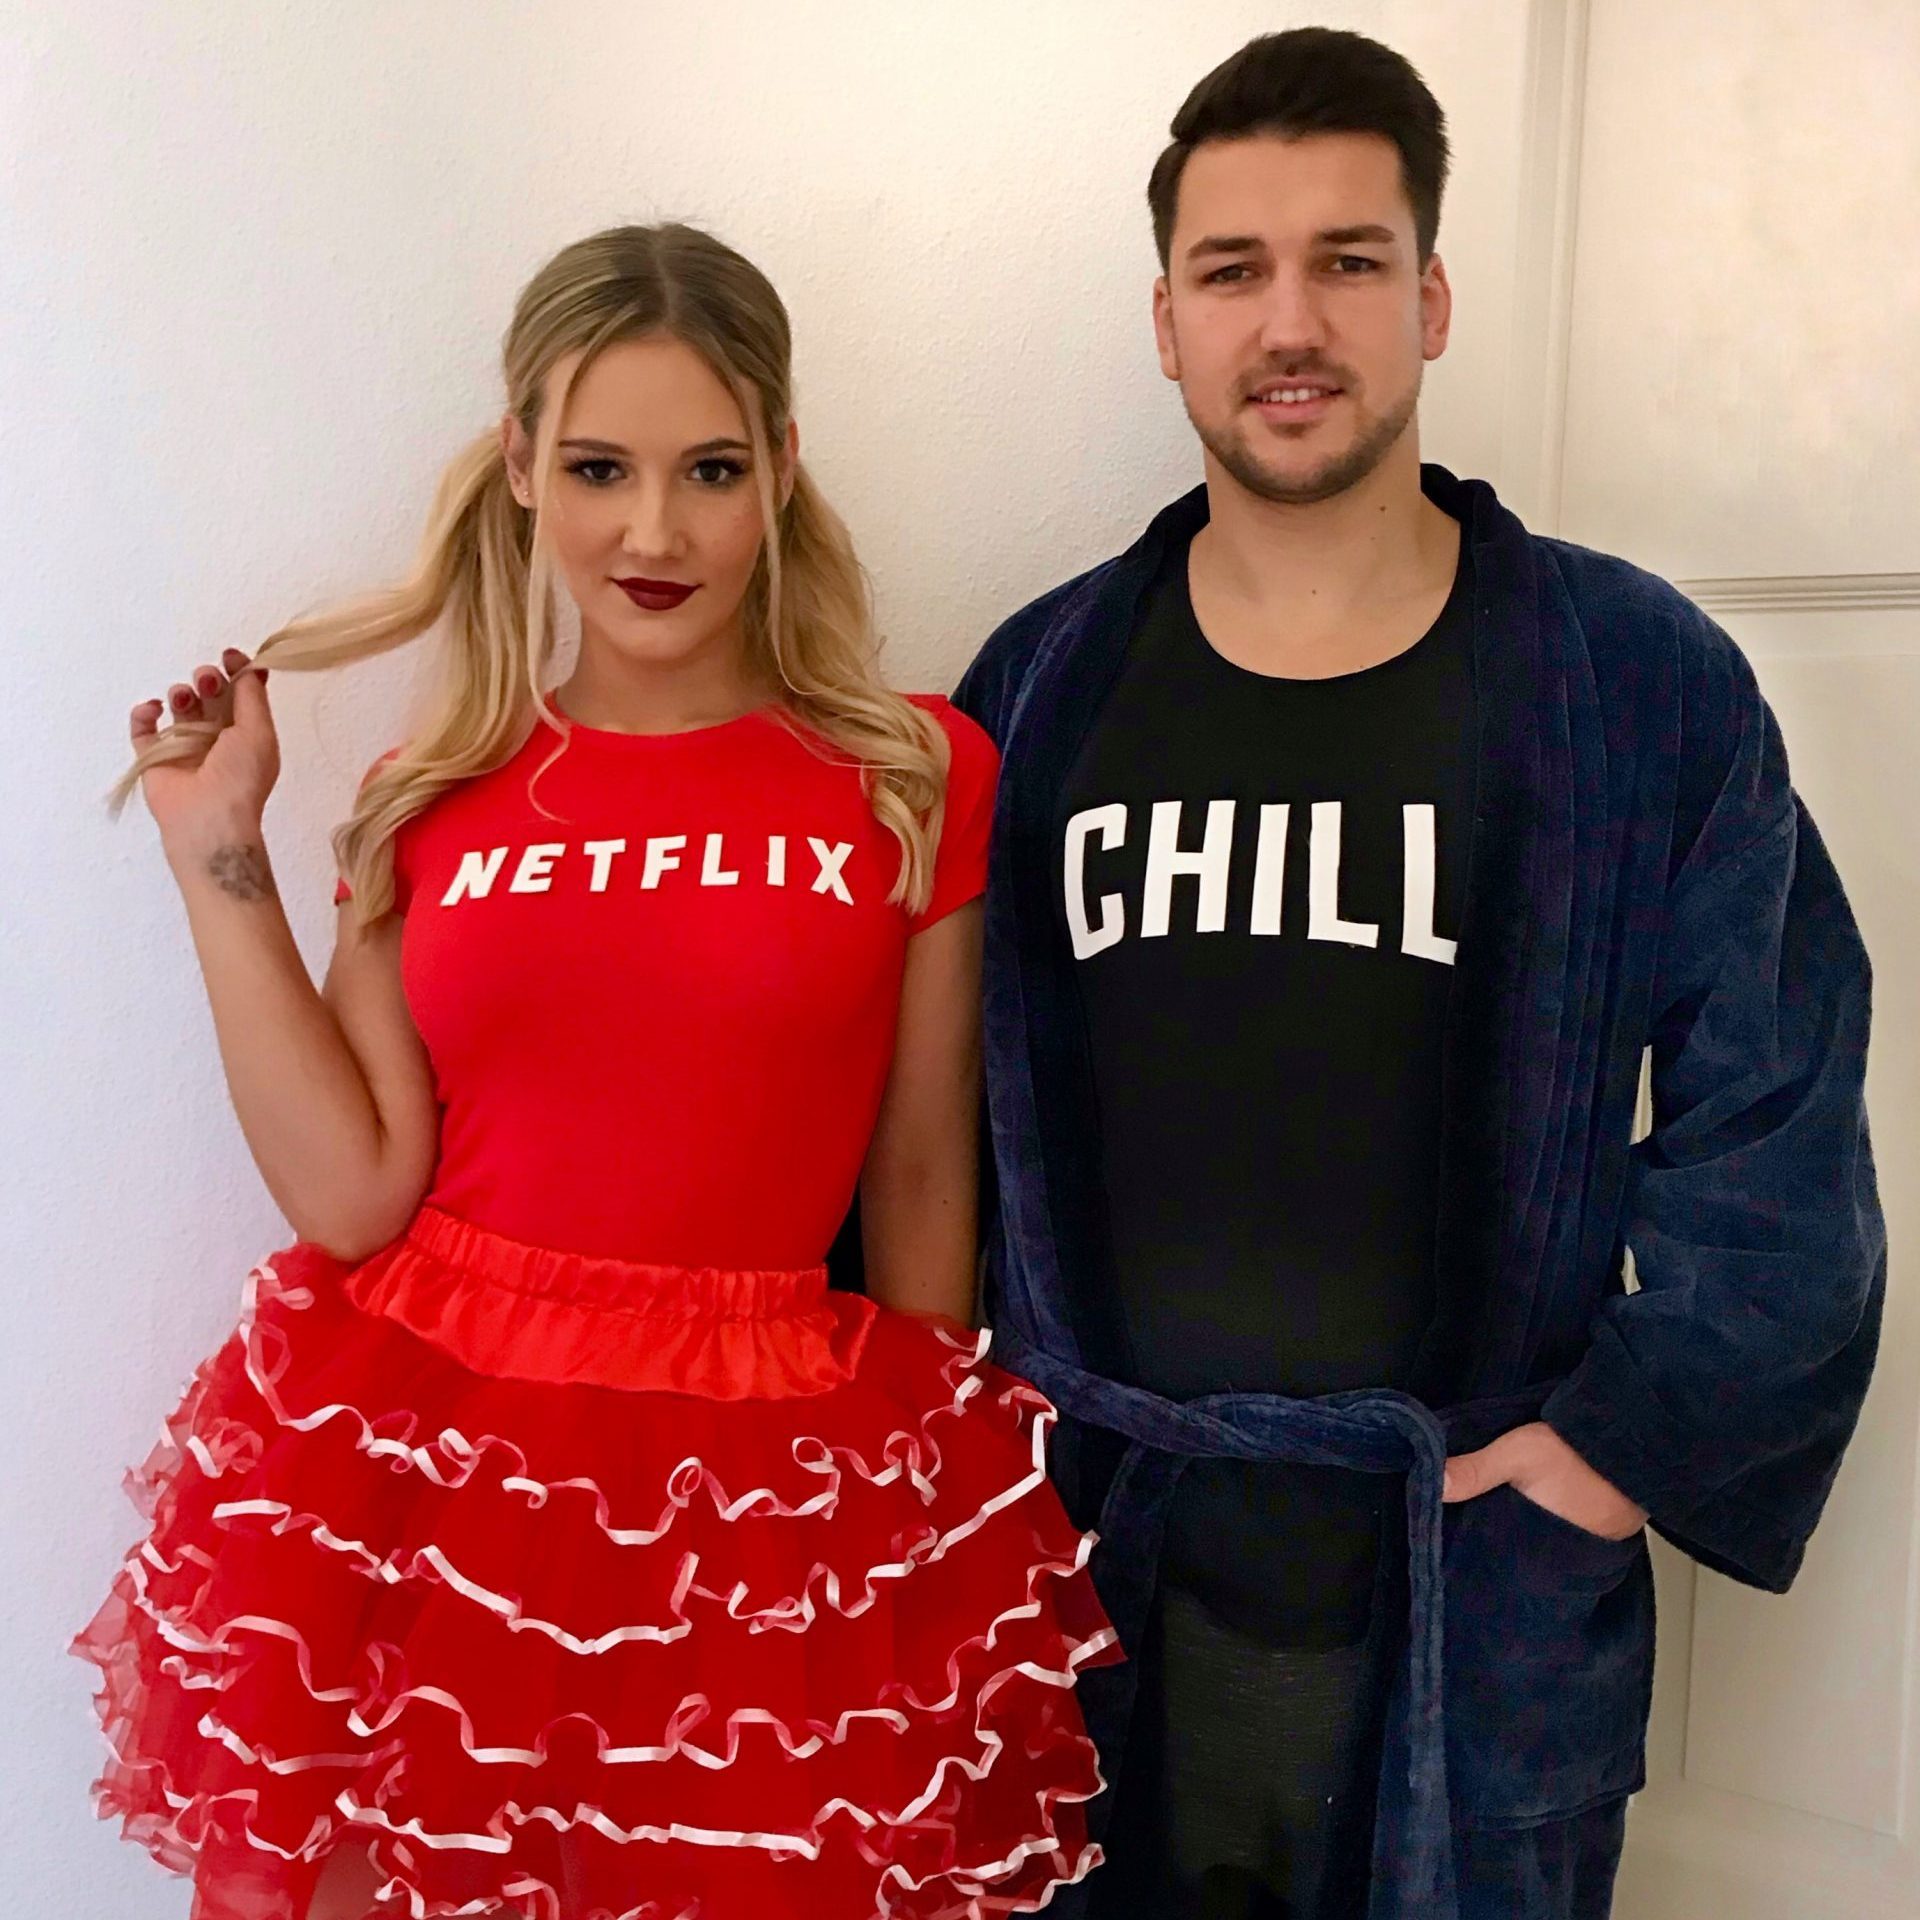 61 Best Couple Halloween Costumes 2021 - Fun & Cute Couple Costumes